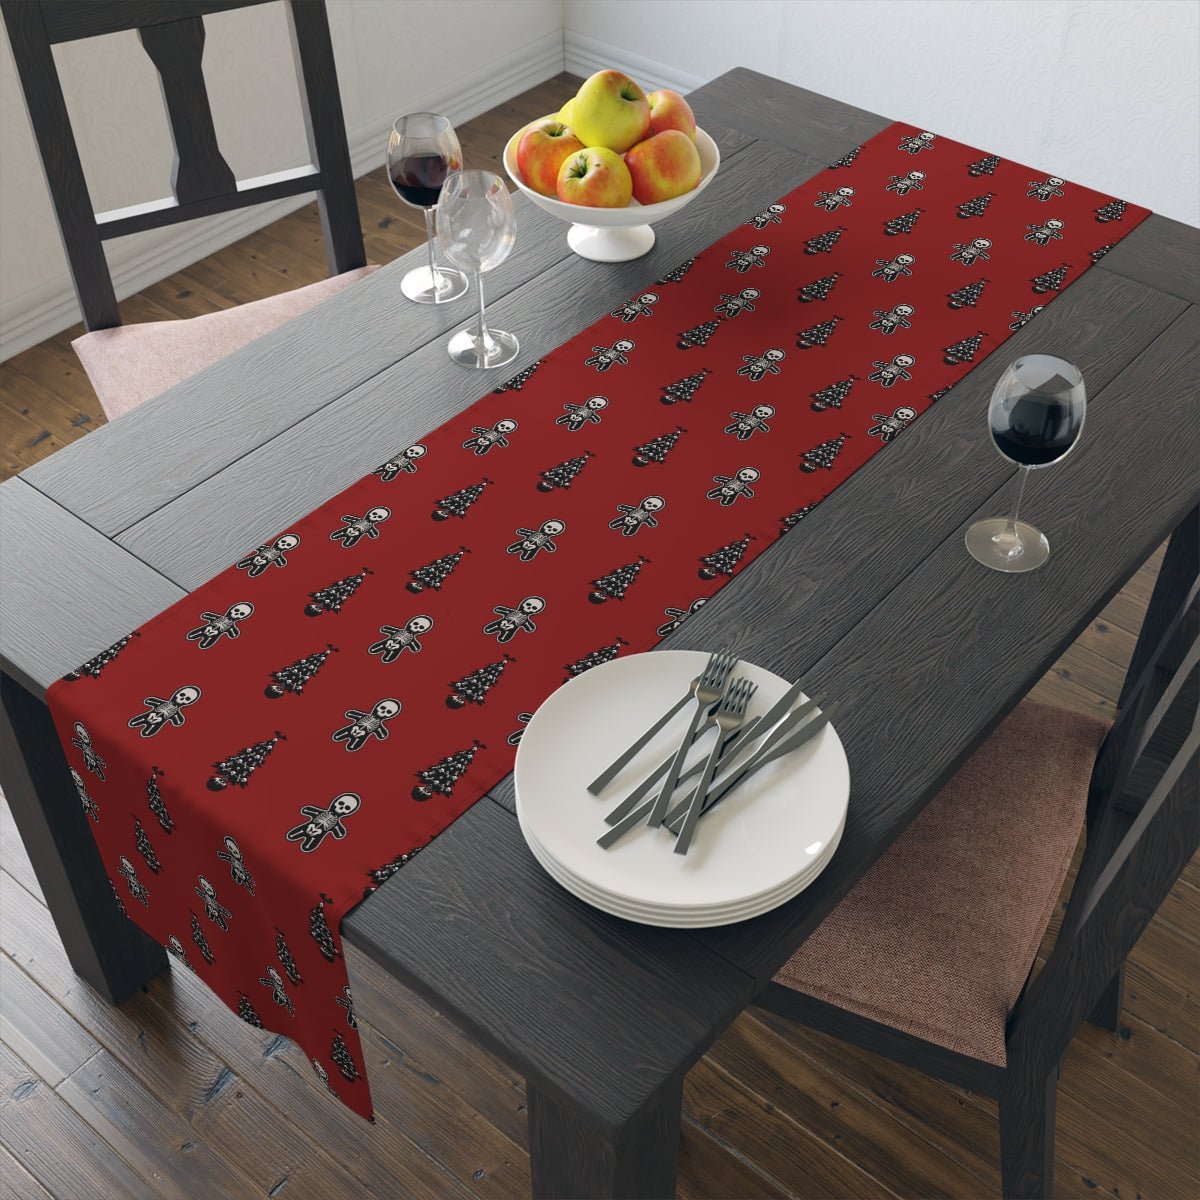 Dead Gingerbread Table Runner (Cotton, Poly)